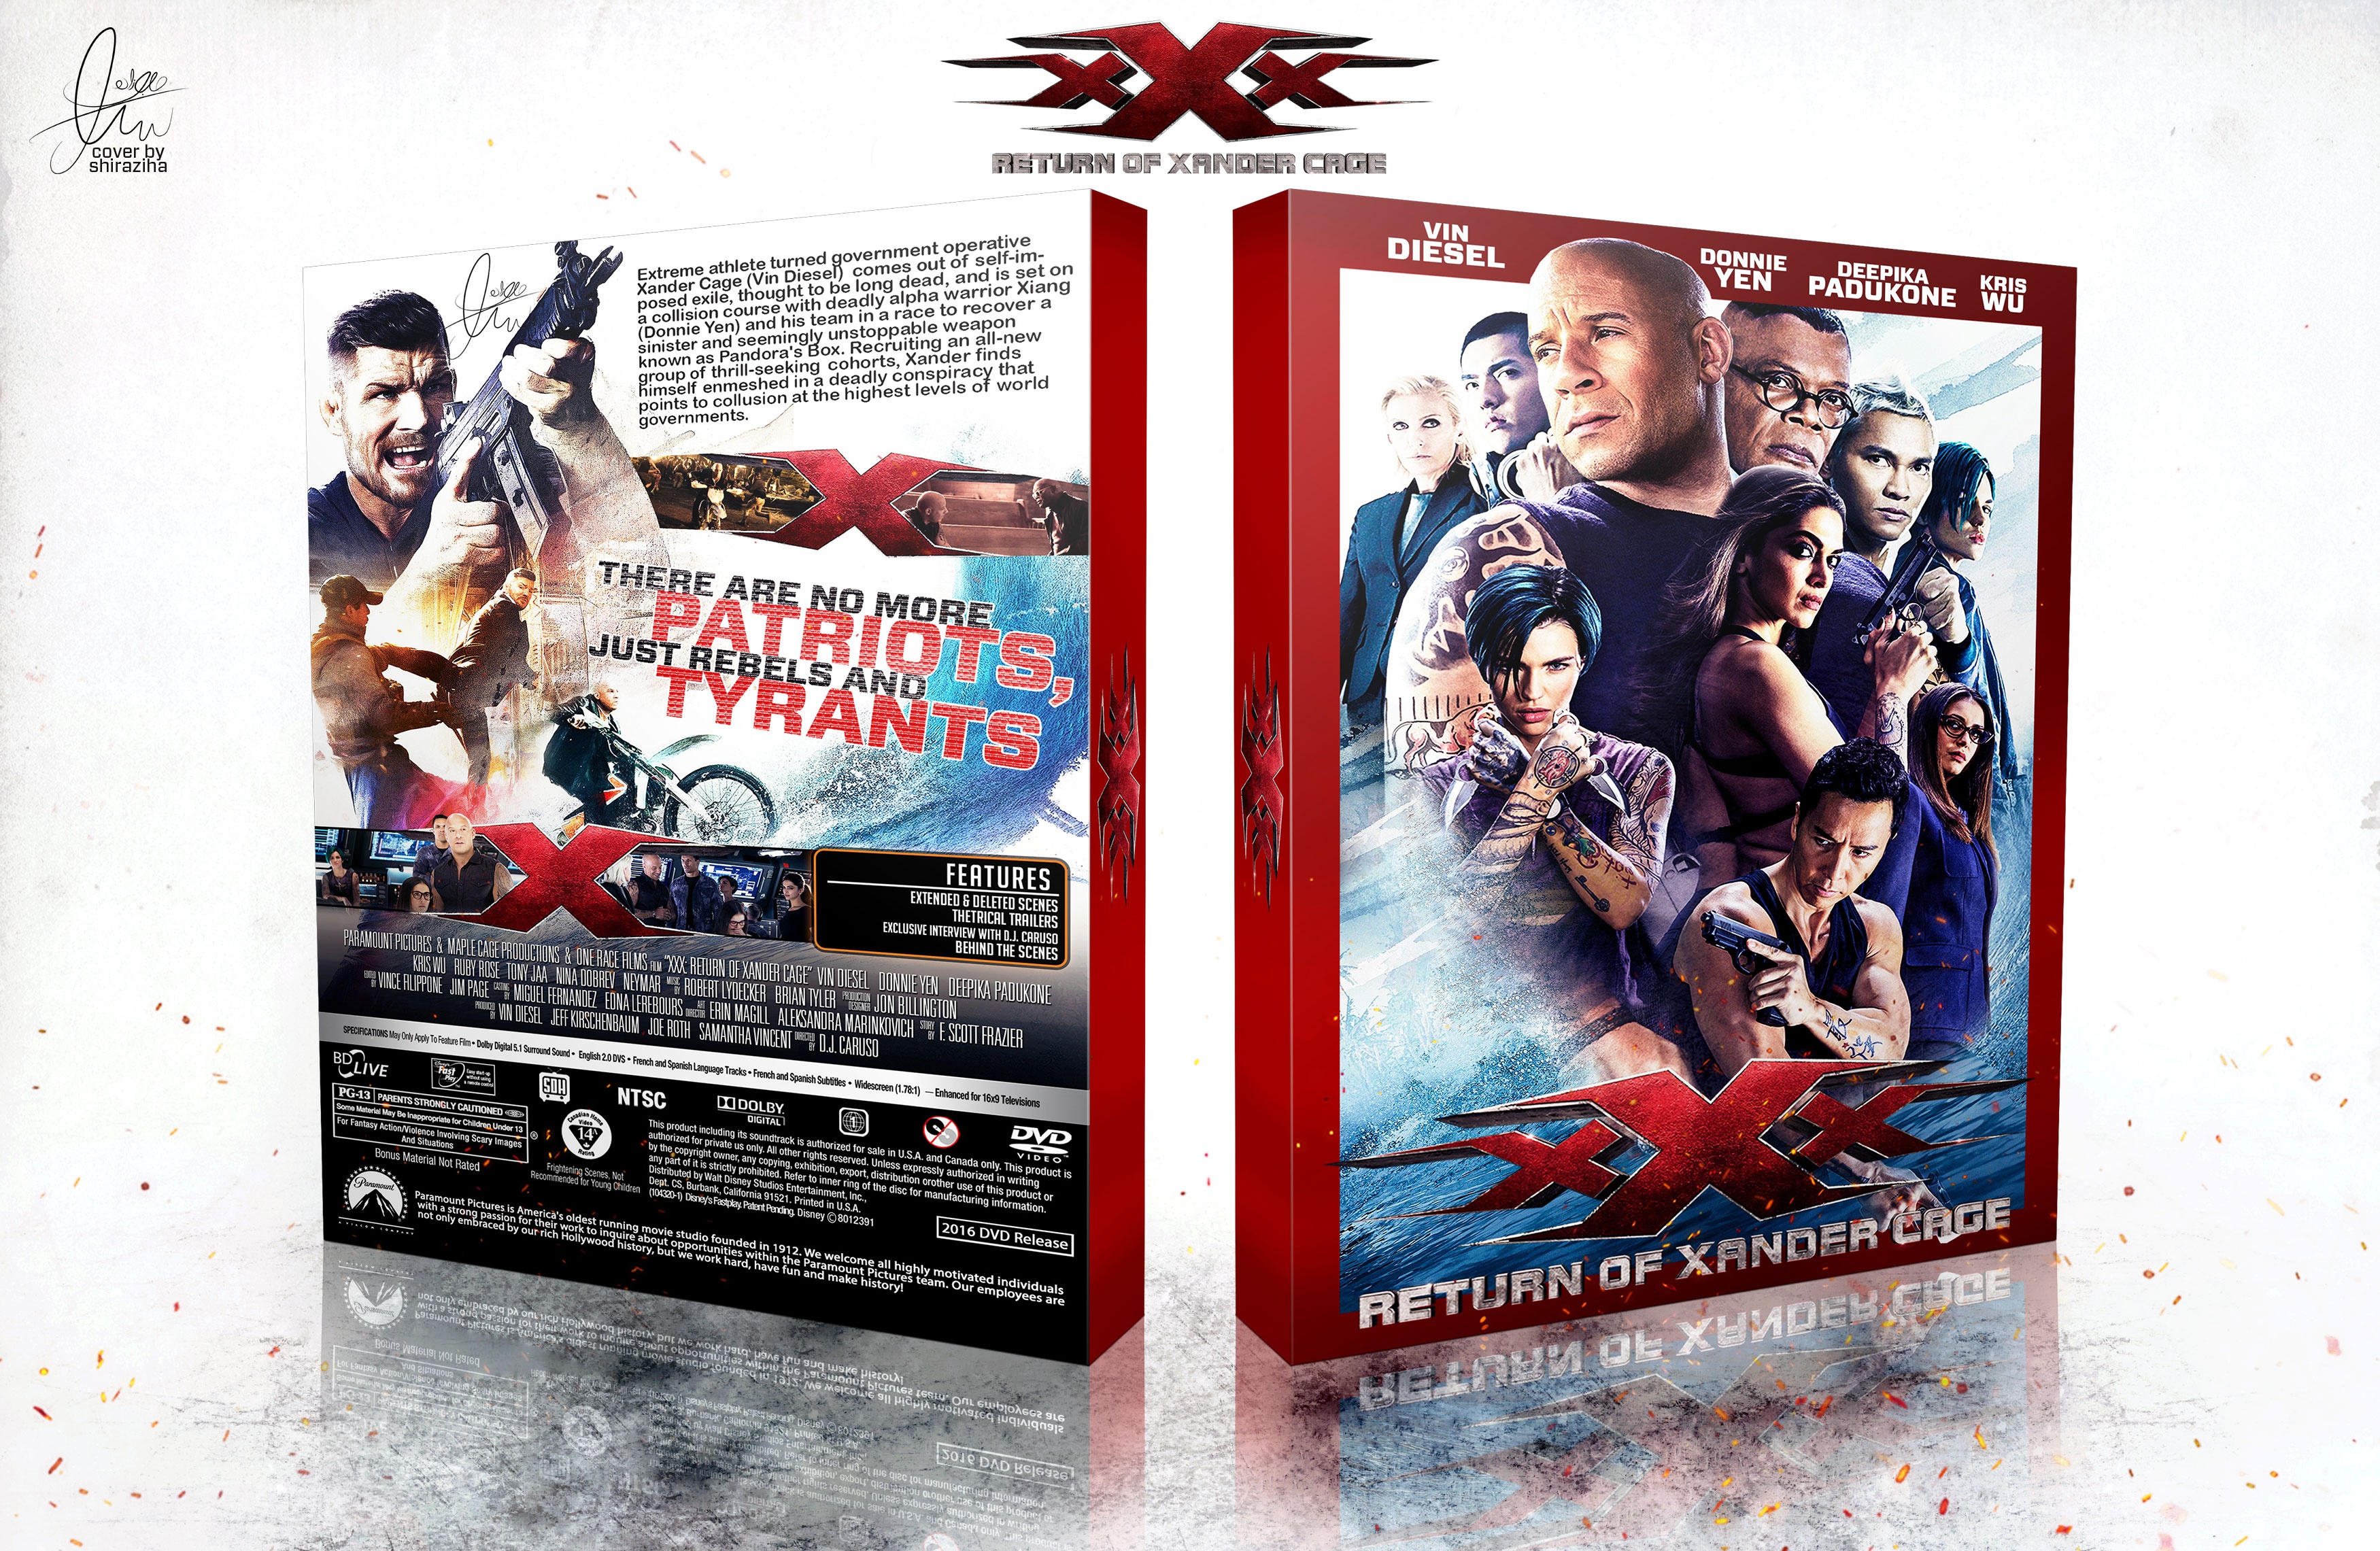 xXx: Return of Xander Cage box cover